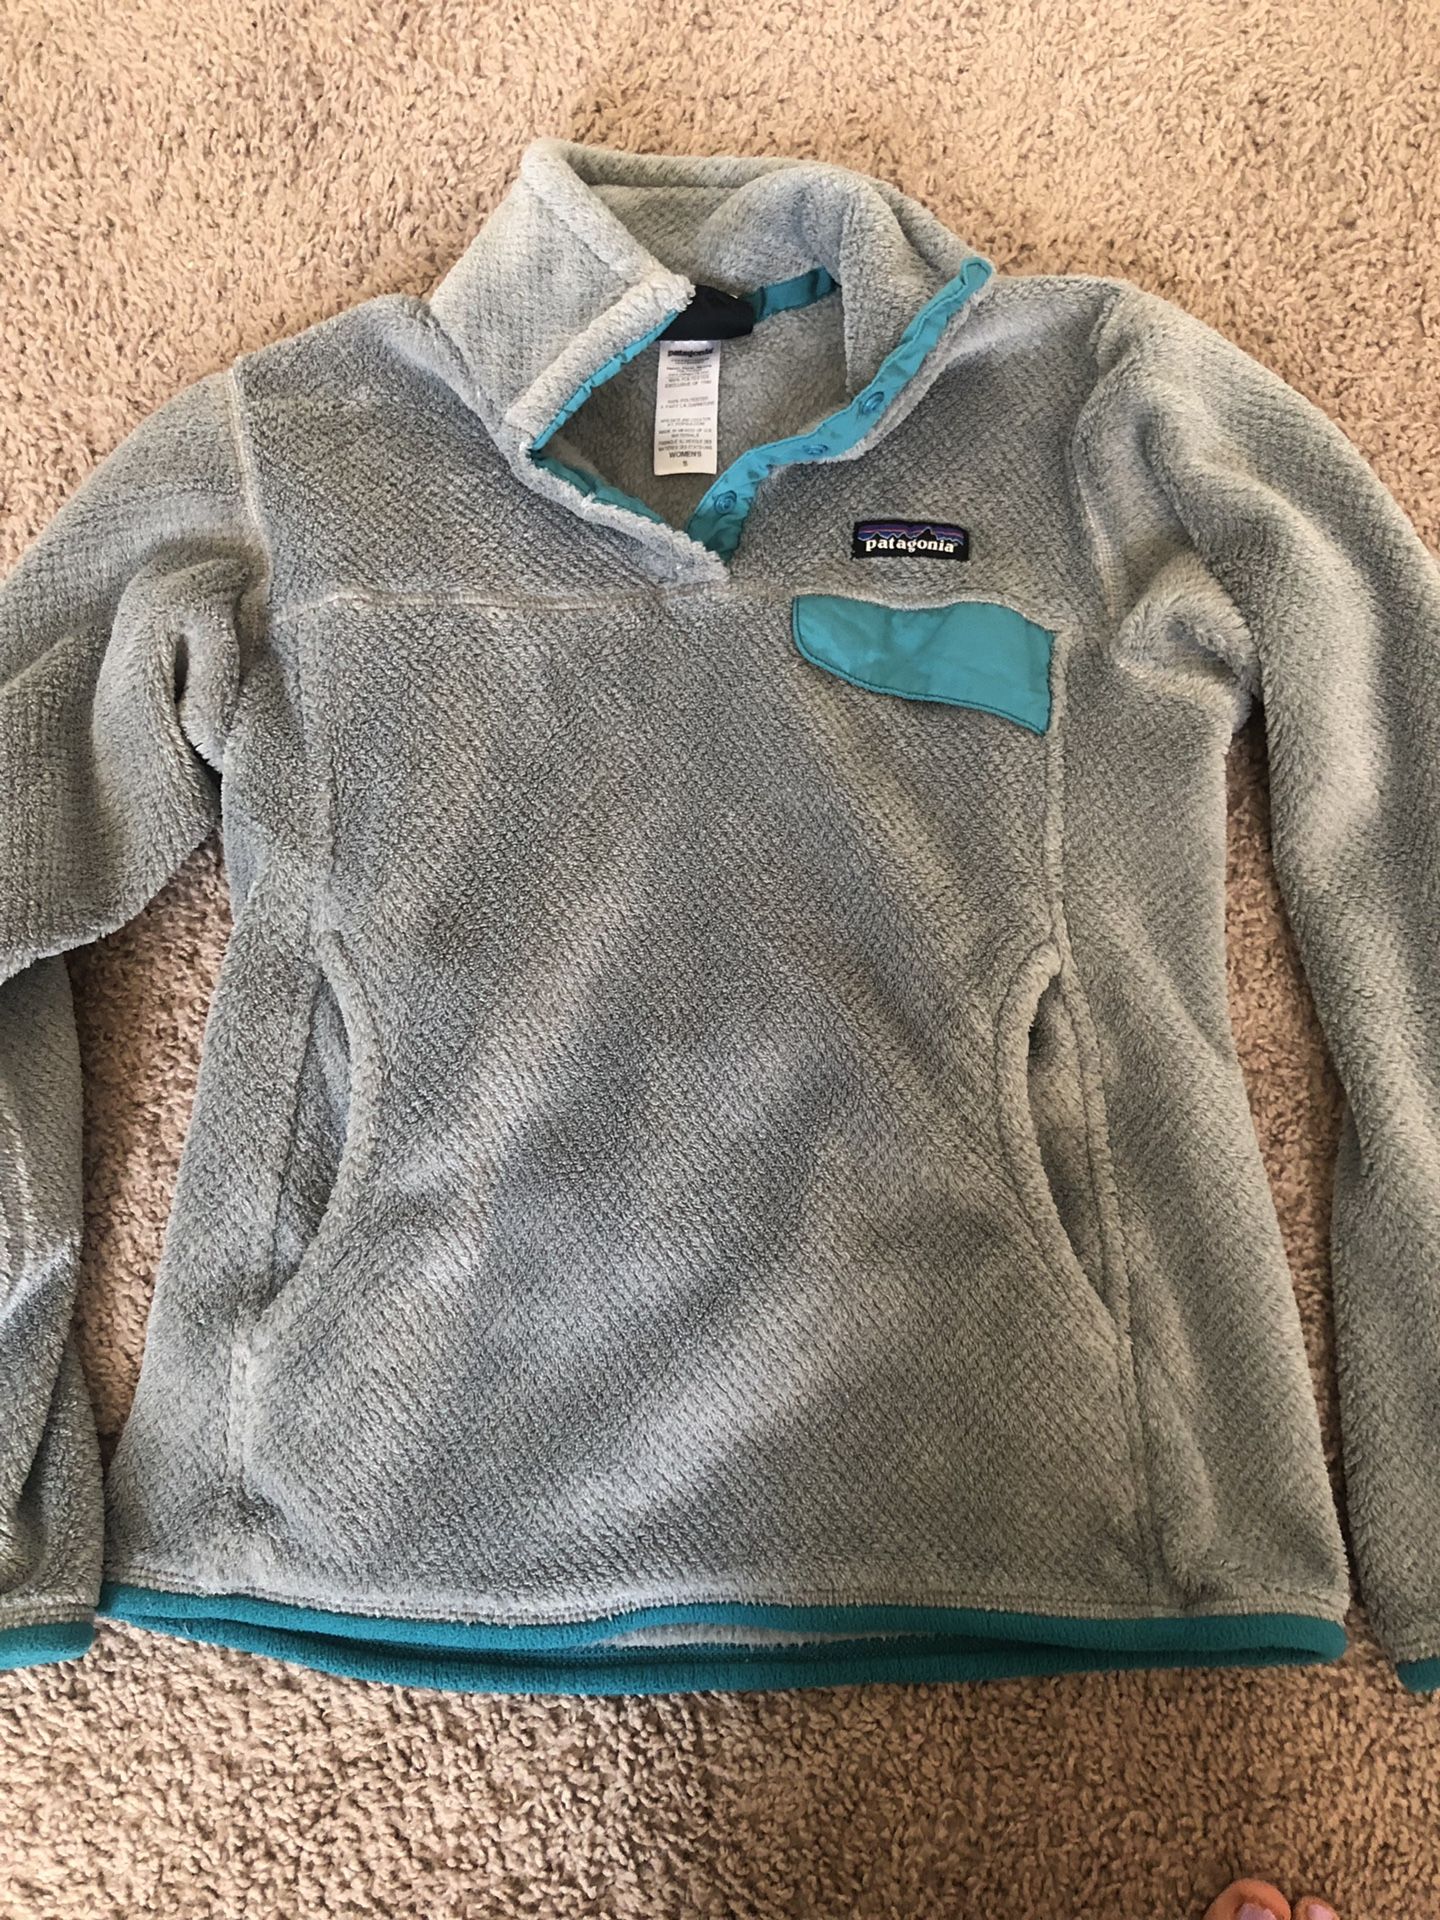 Women’s Patagonia size small